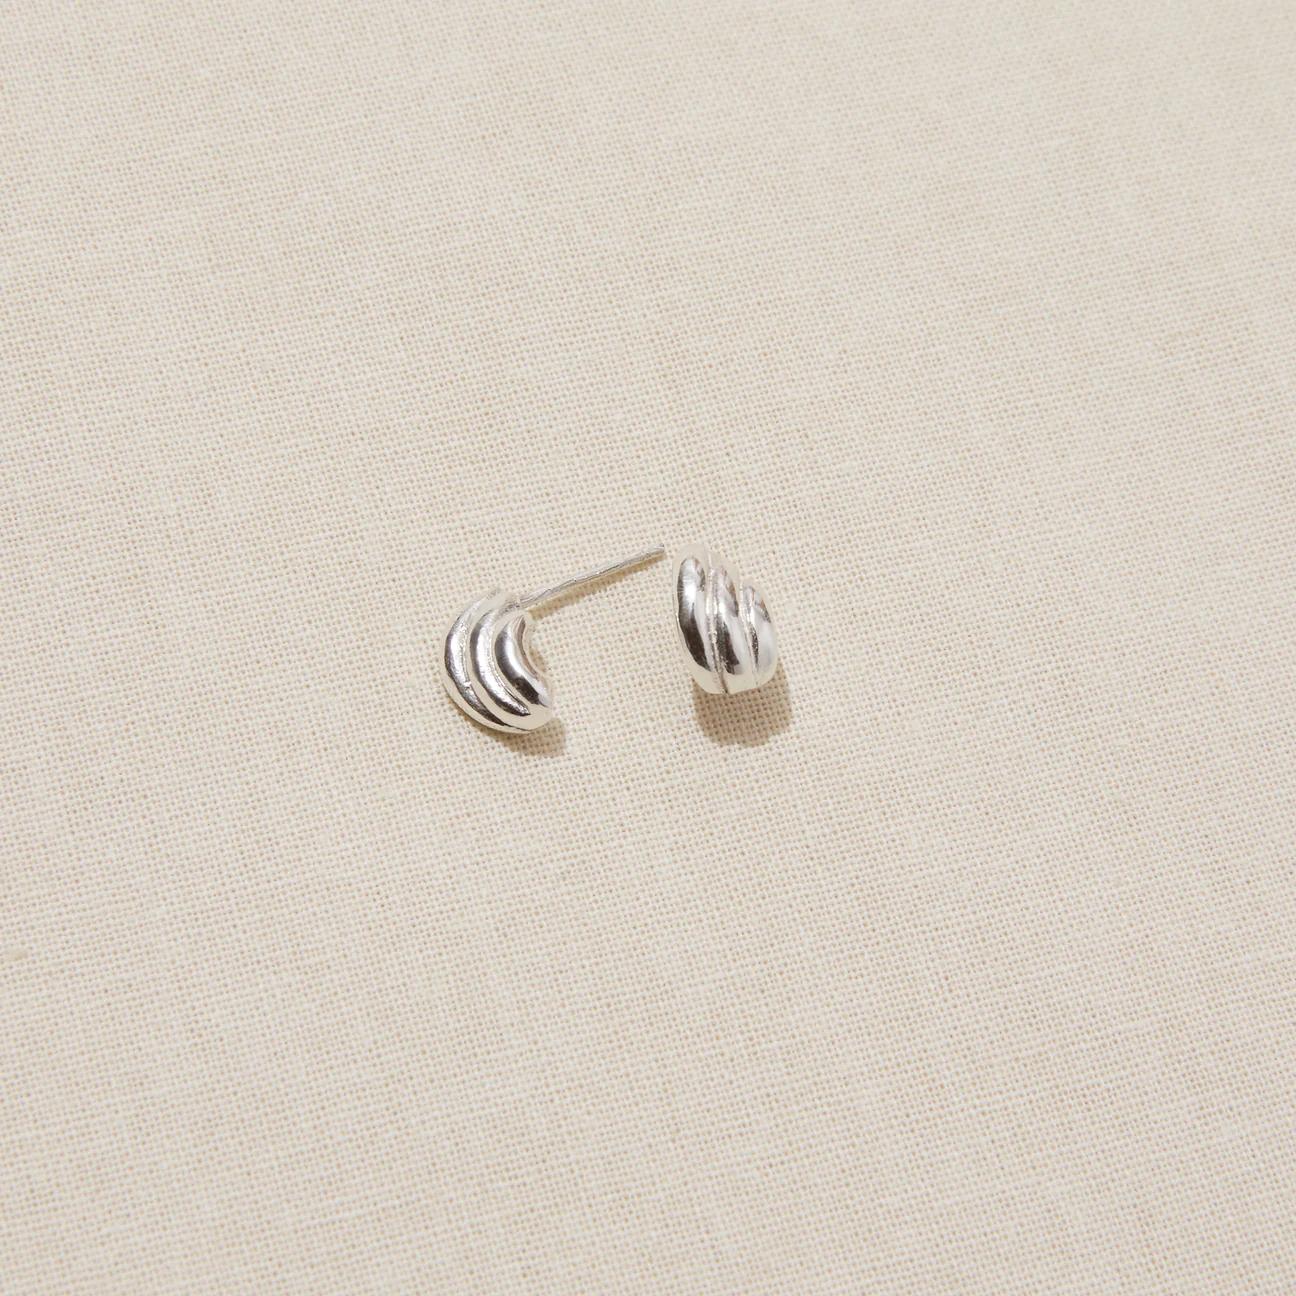 Product Image for Tri Stud, Sterling Silver